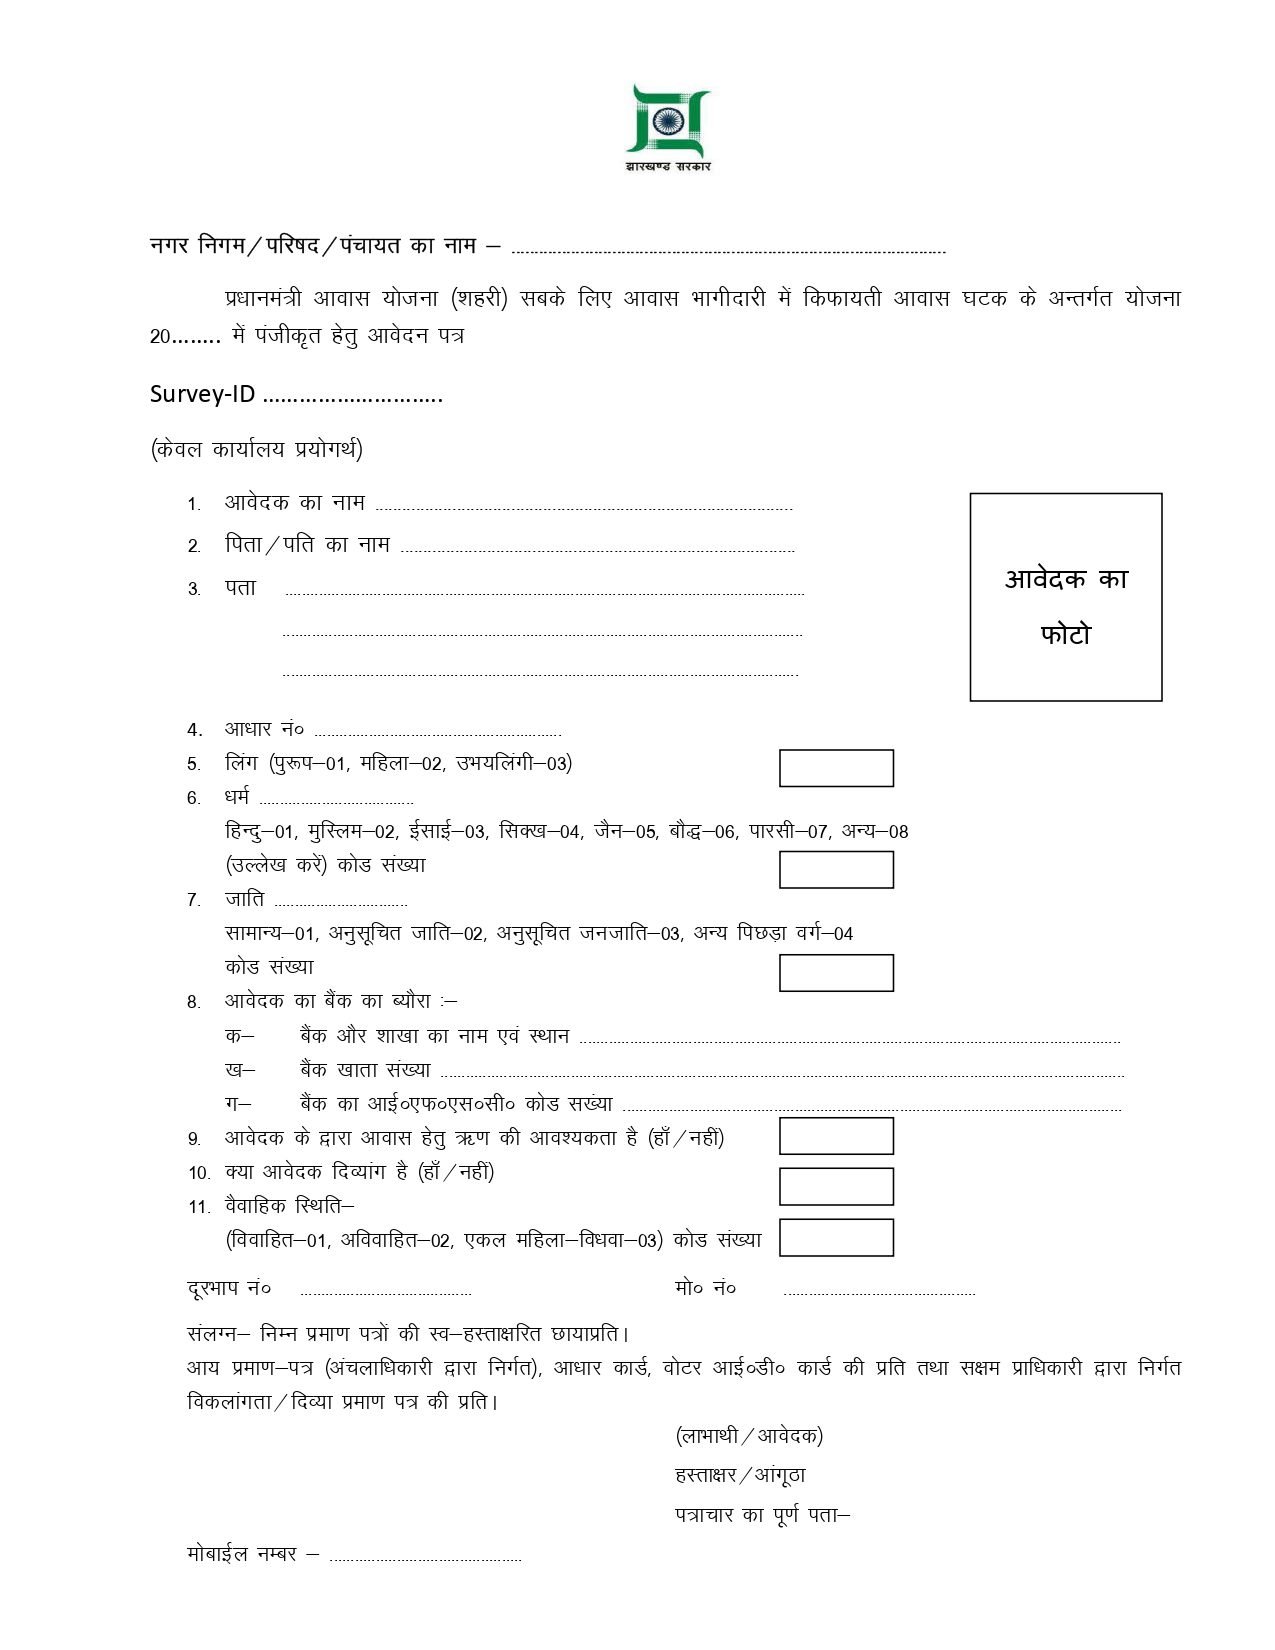 How to apply for PM AWAS Yojana online and offline